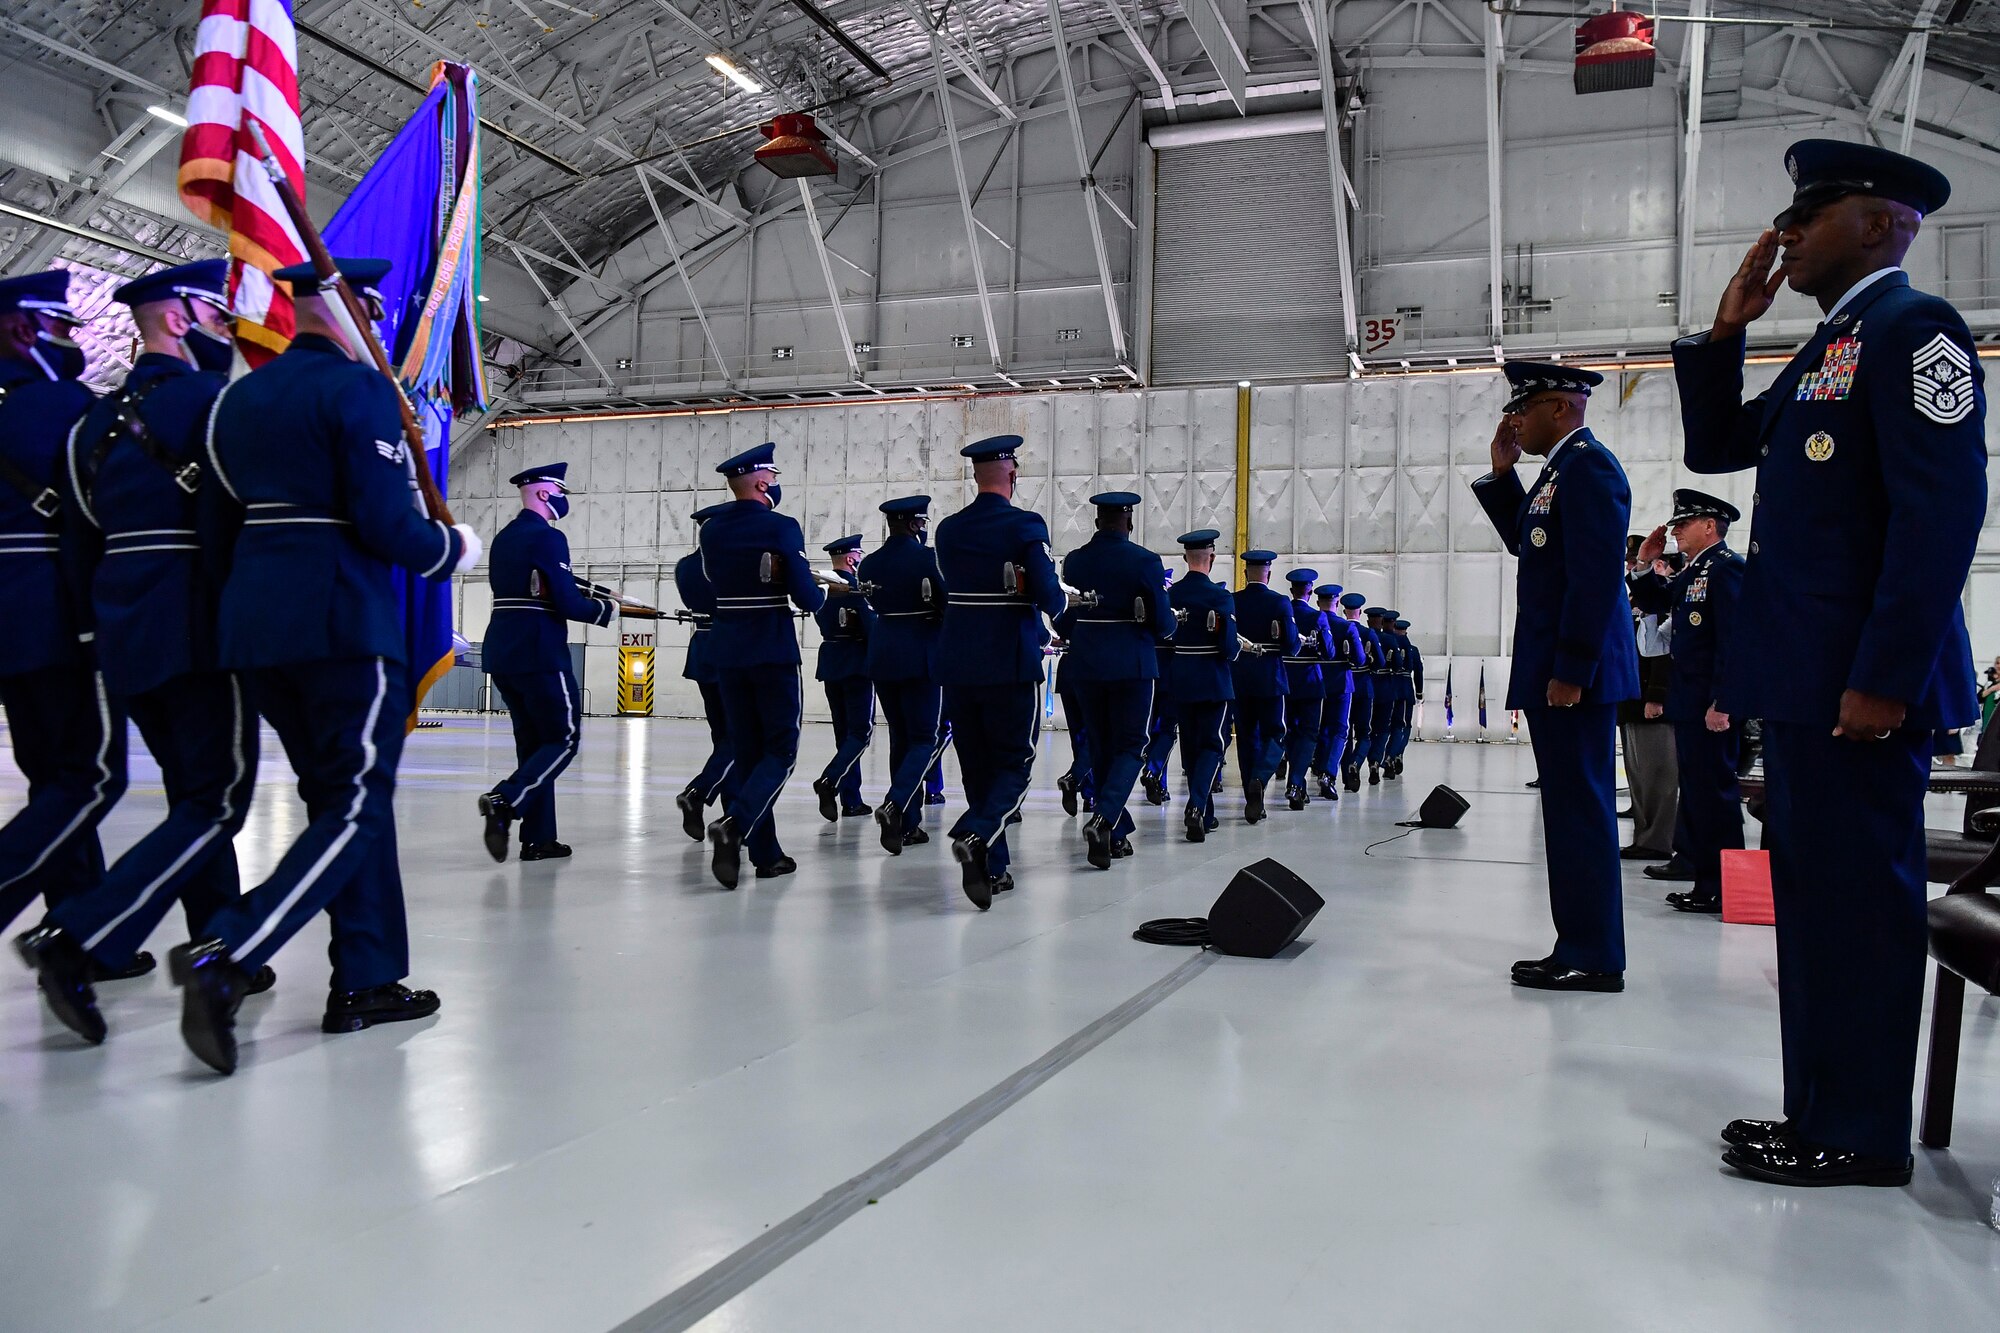 The Air Force Honor Guard performs a pass in review in front of Air Force Chief of Staff Gen. Charles Q. Brown Jr. during a change of responsibility ceremony at Joint Base Andrews, Md., Aug. 6, 2020. Brown replaced Gen. David L. Goldfein as the 22nd chief of staff. (U.S. Air Force photo by Eric Dietrich)